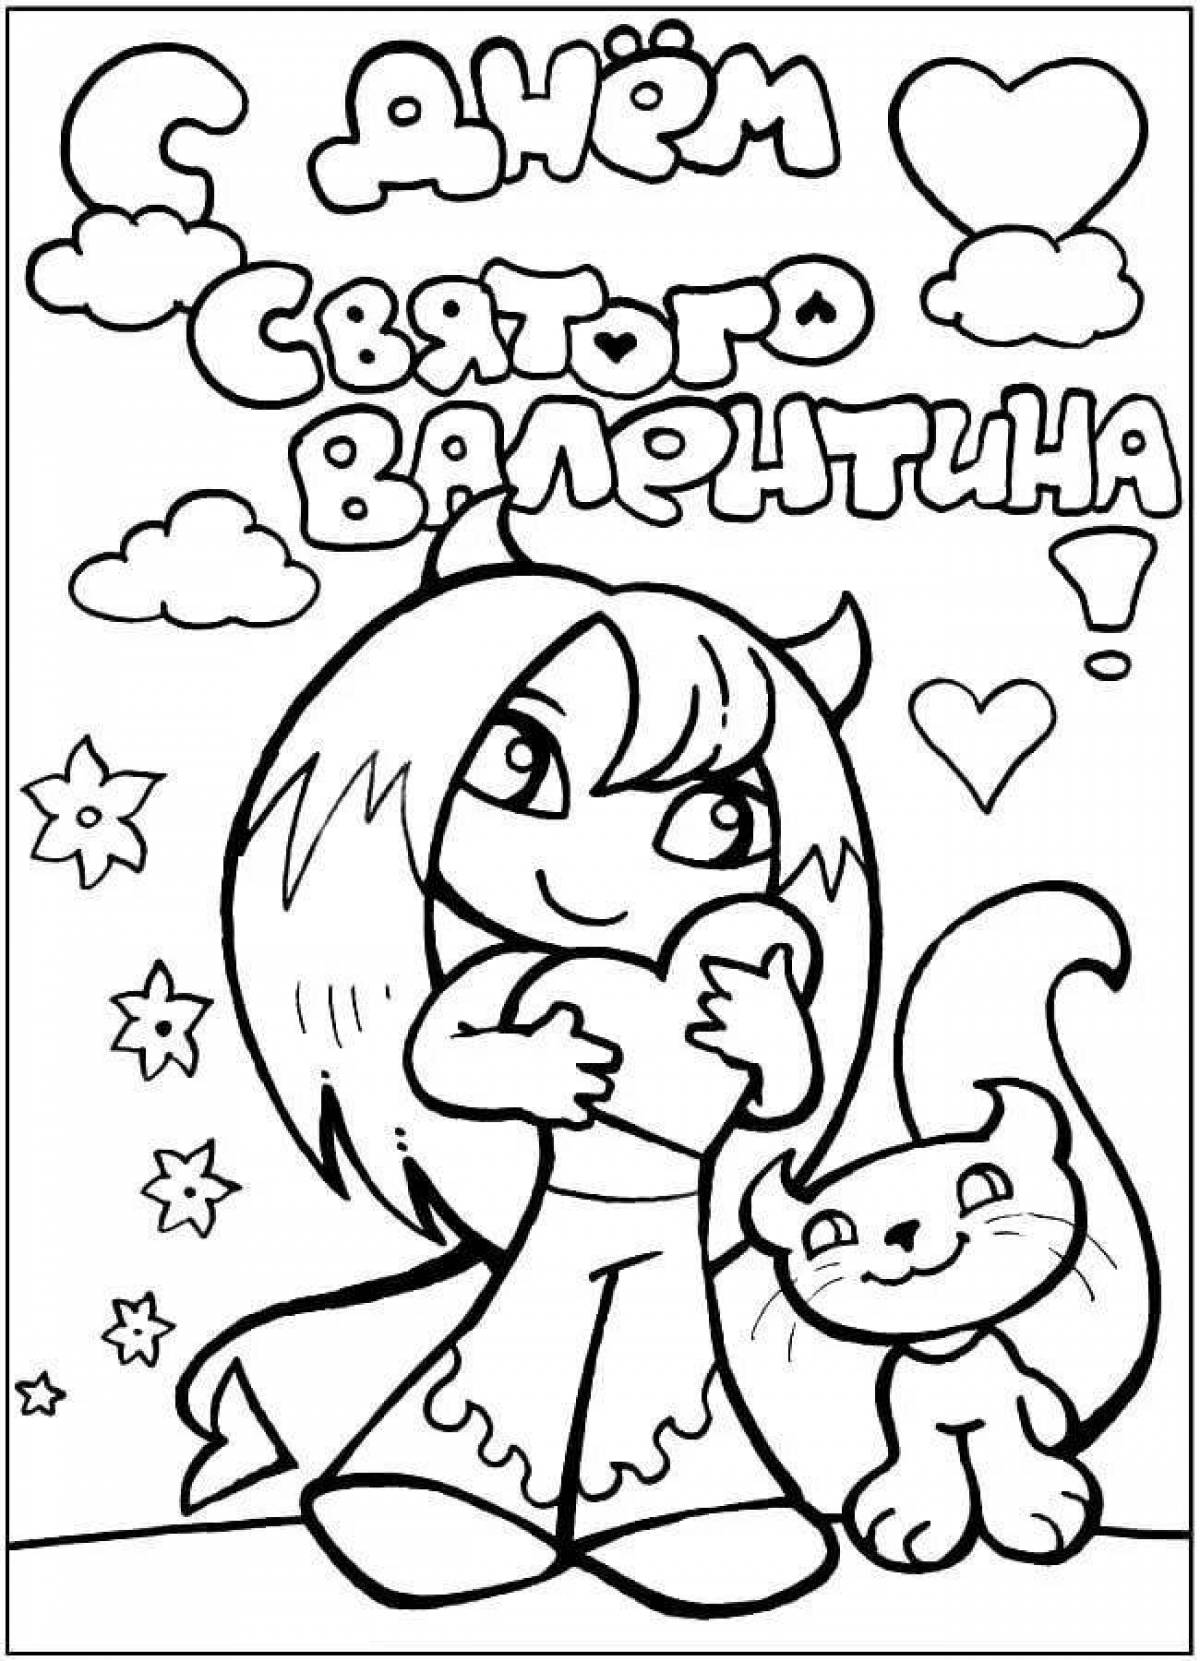 February 14 coloring page